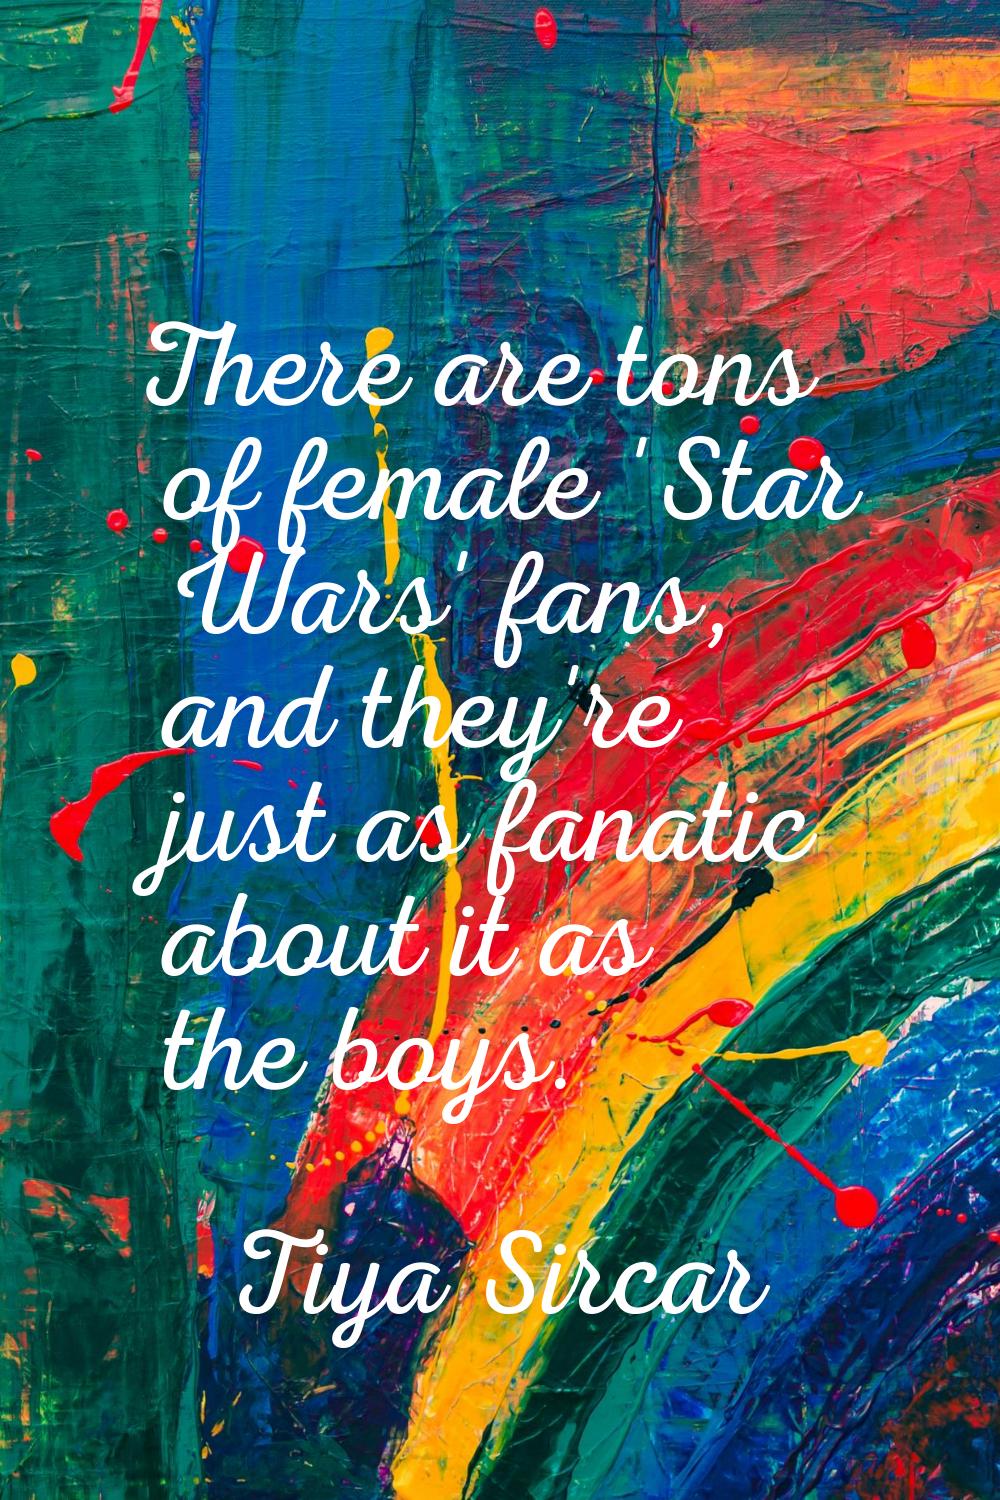 There are tons of female 'Star Wars' fans, and they're just as fanatic about it as the boys.